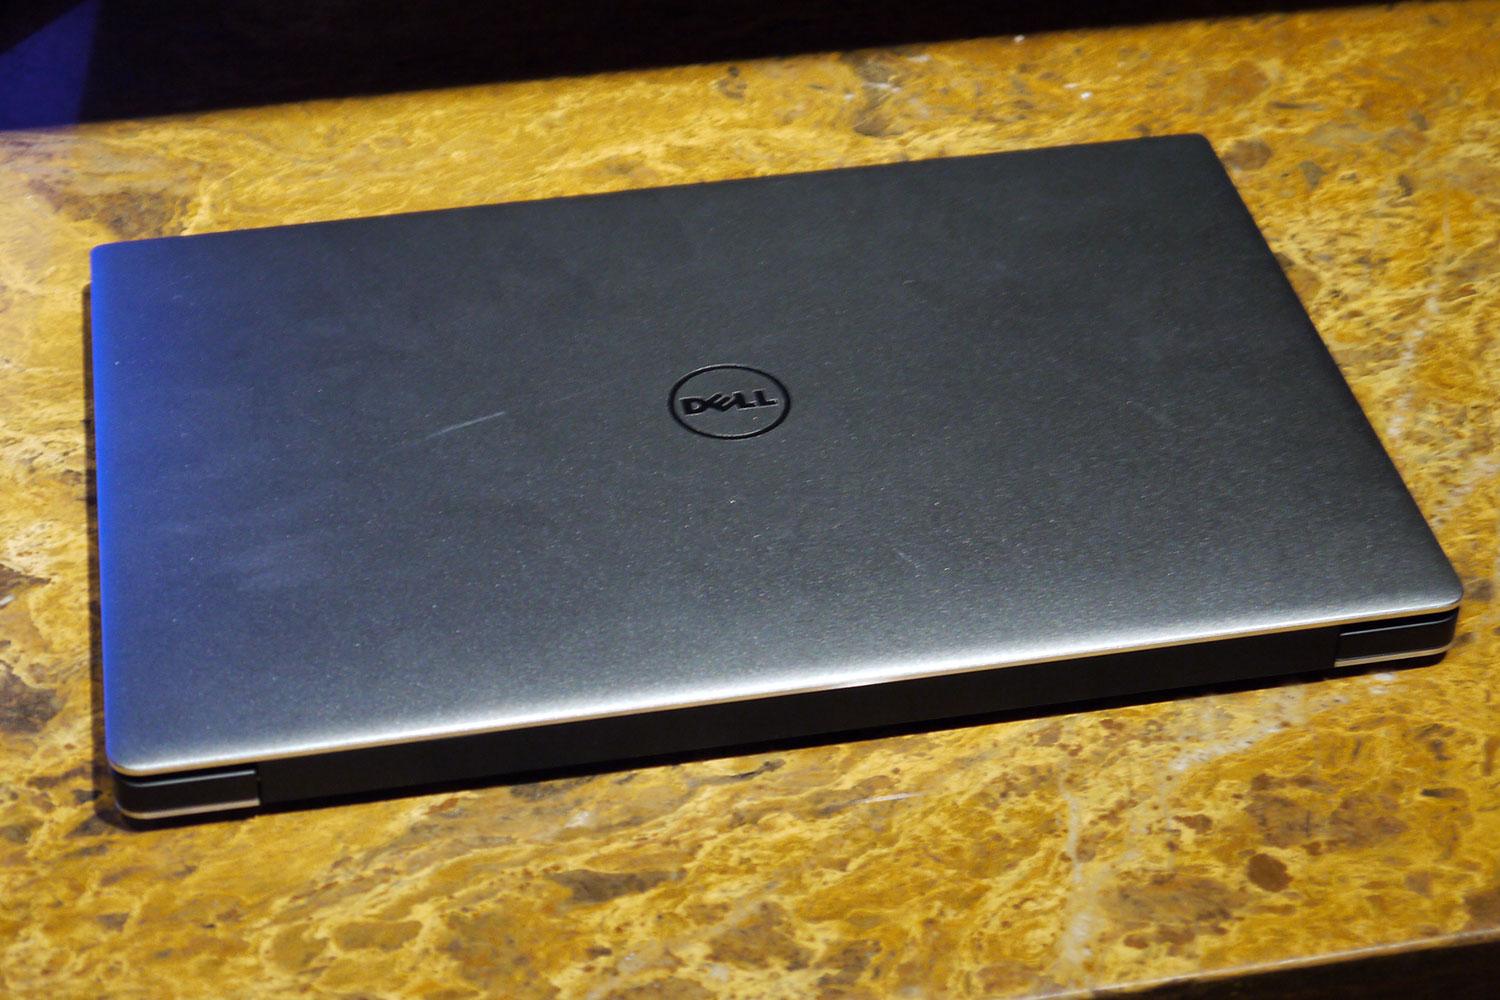 dell xps 13 laptop has a screen with virtually no bezel hands on p1100295